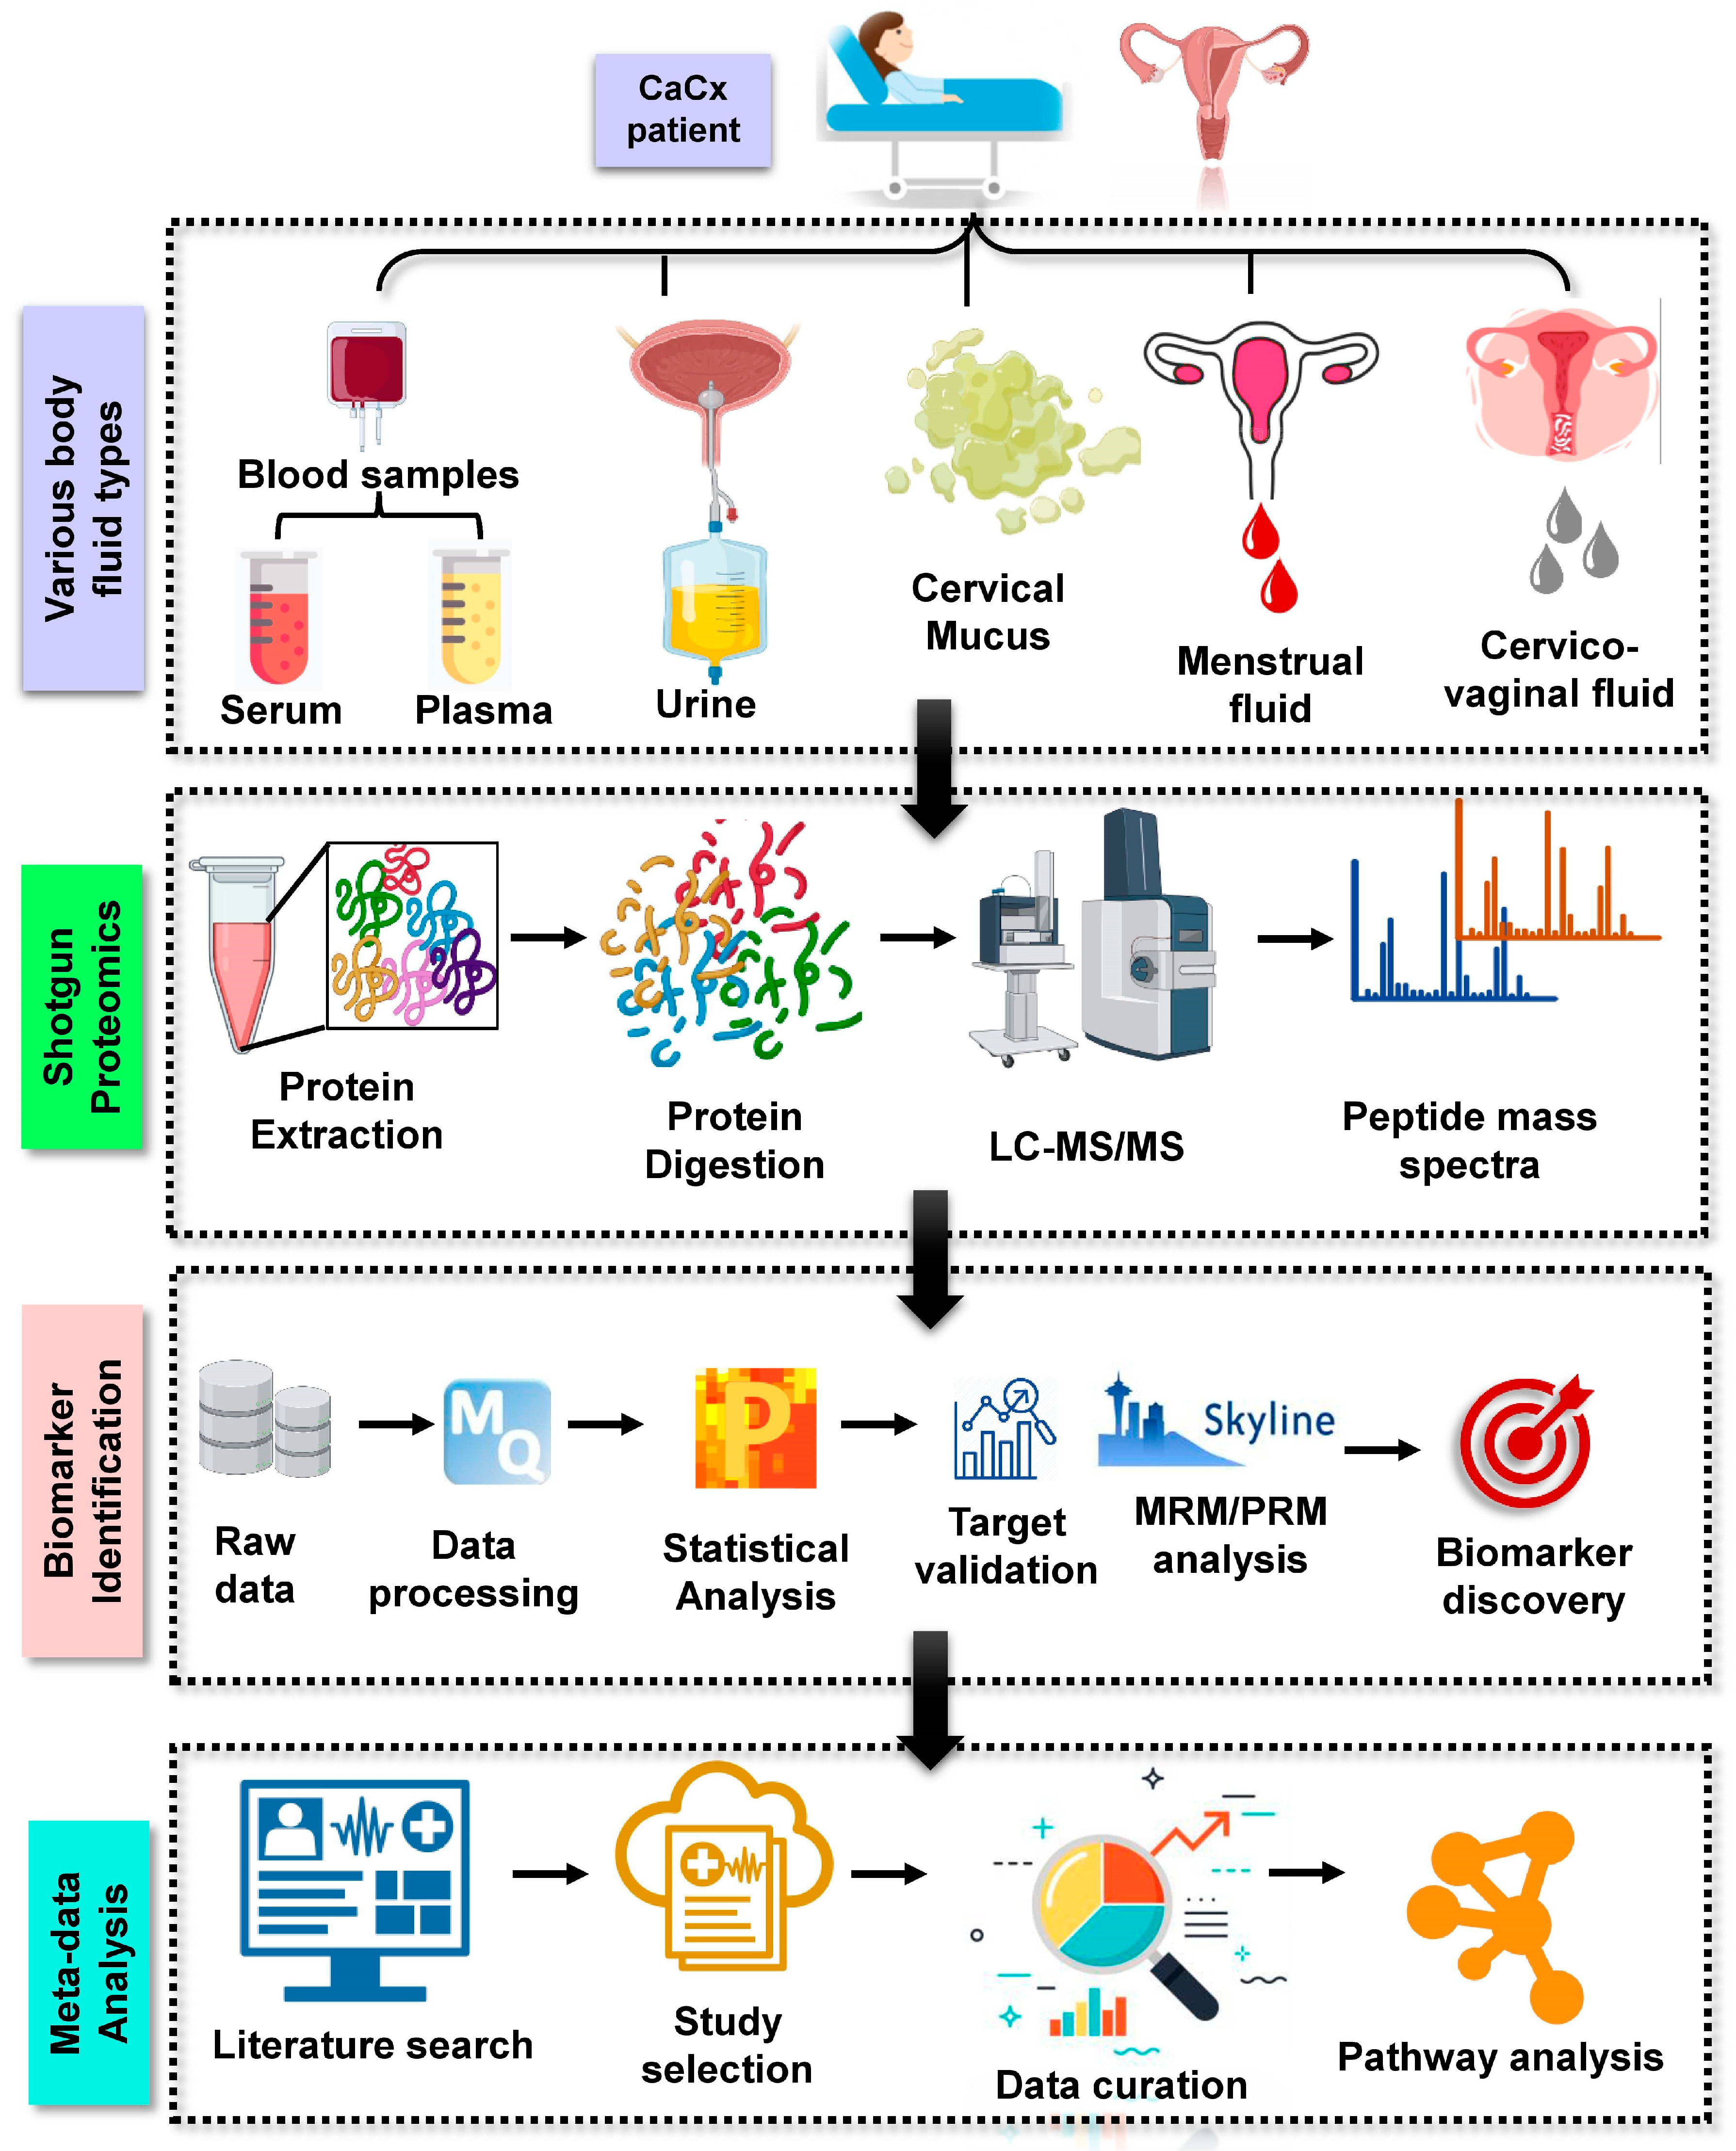 Systems Proteomics View of the Endogenous Human Claudin Protein